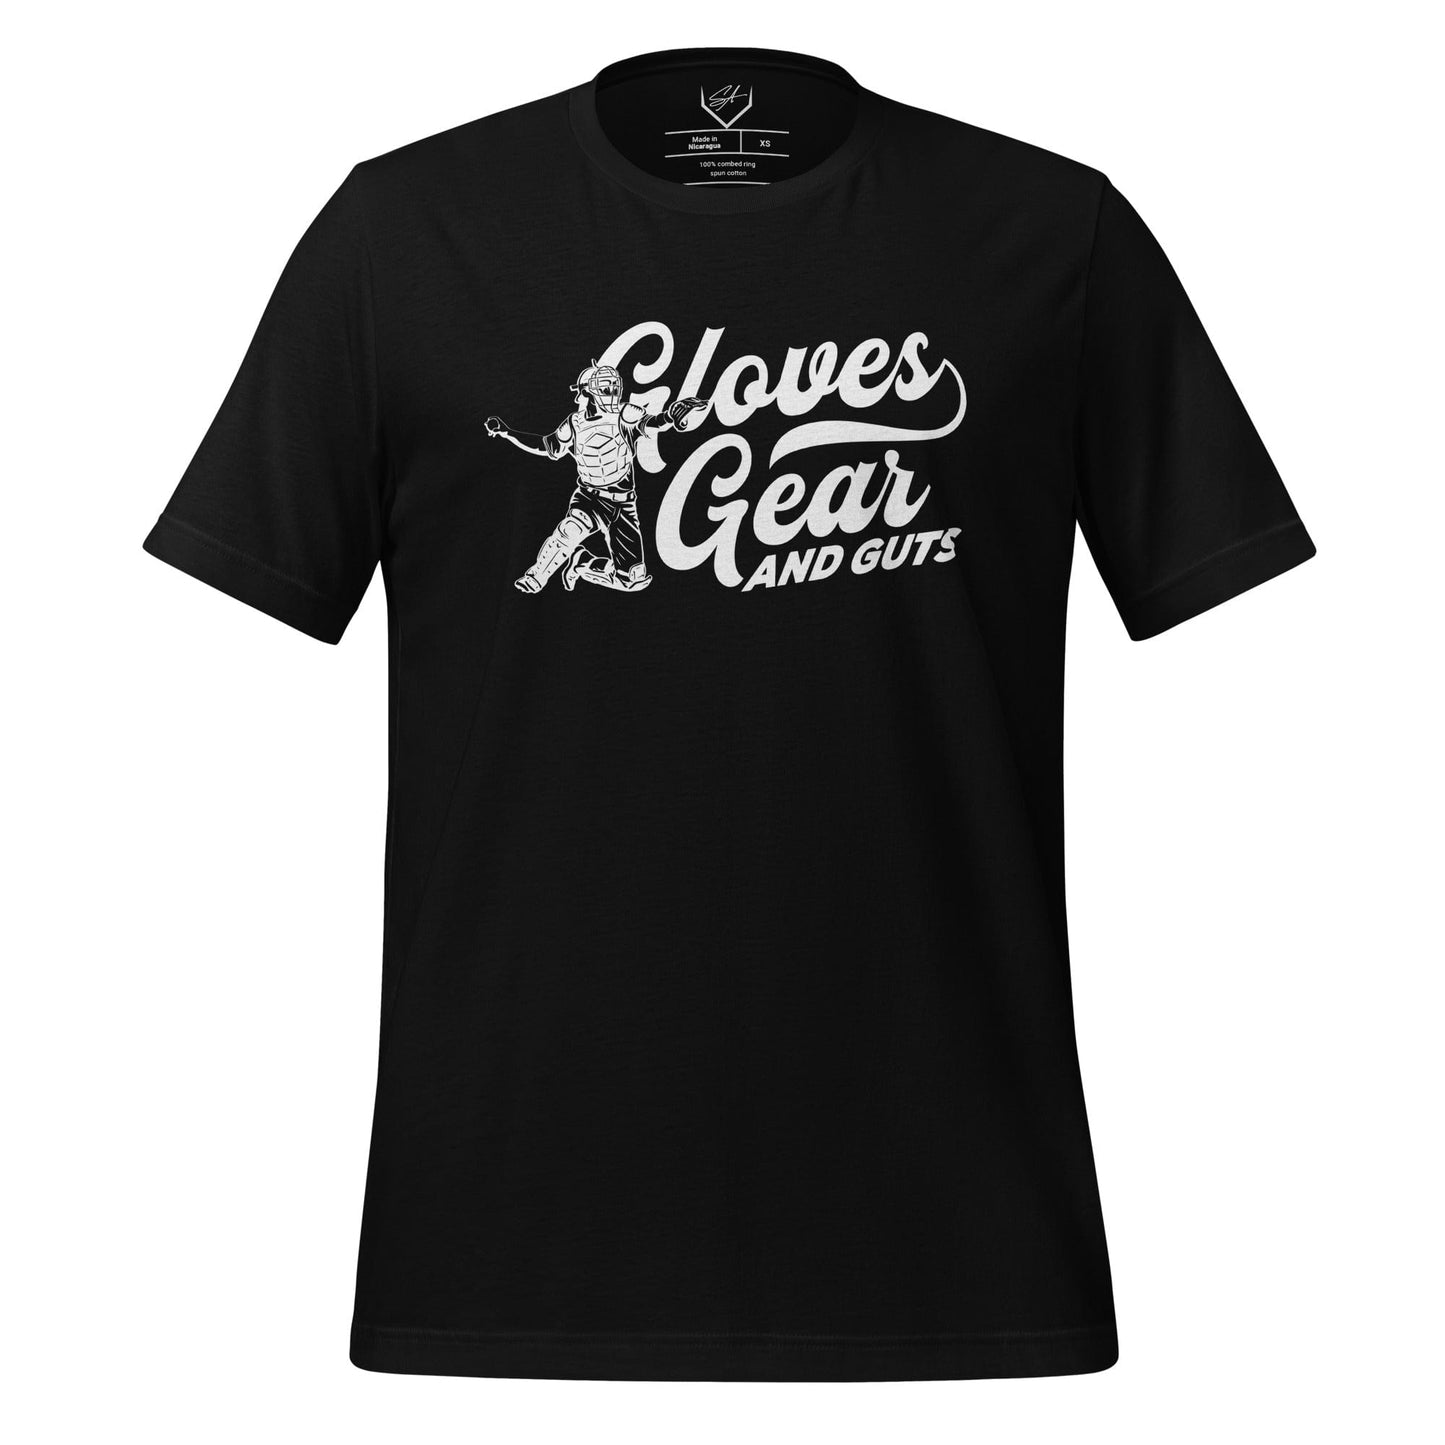 Gloves Gear And Guts - Adult Tee